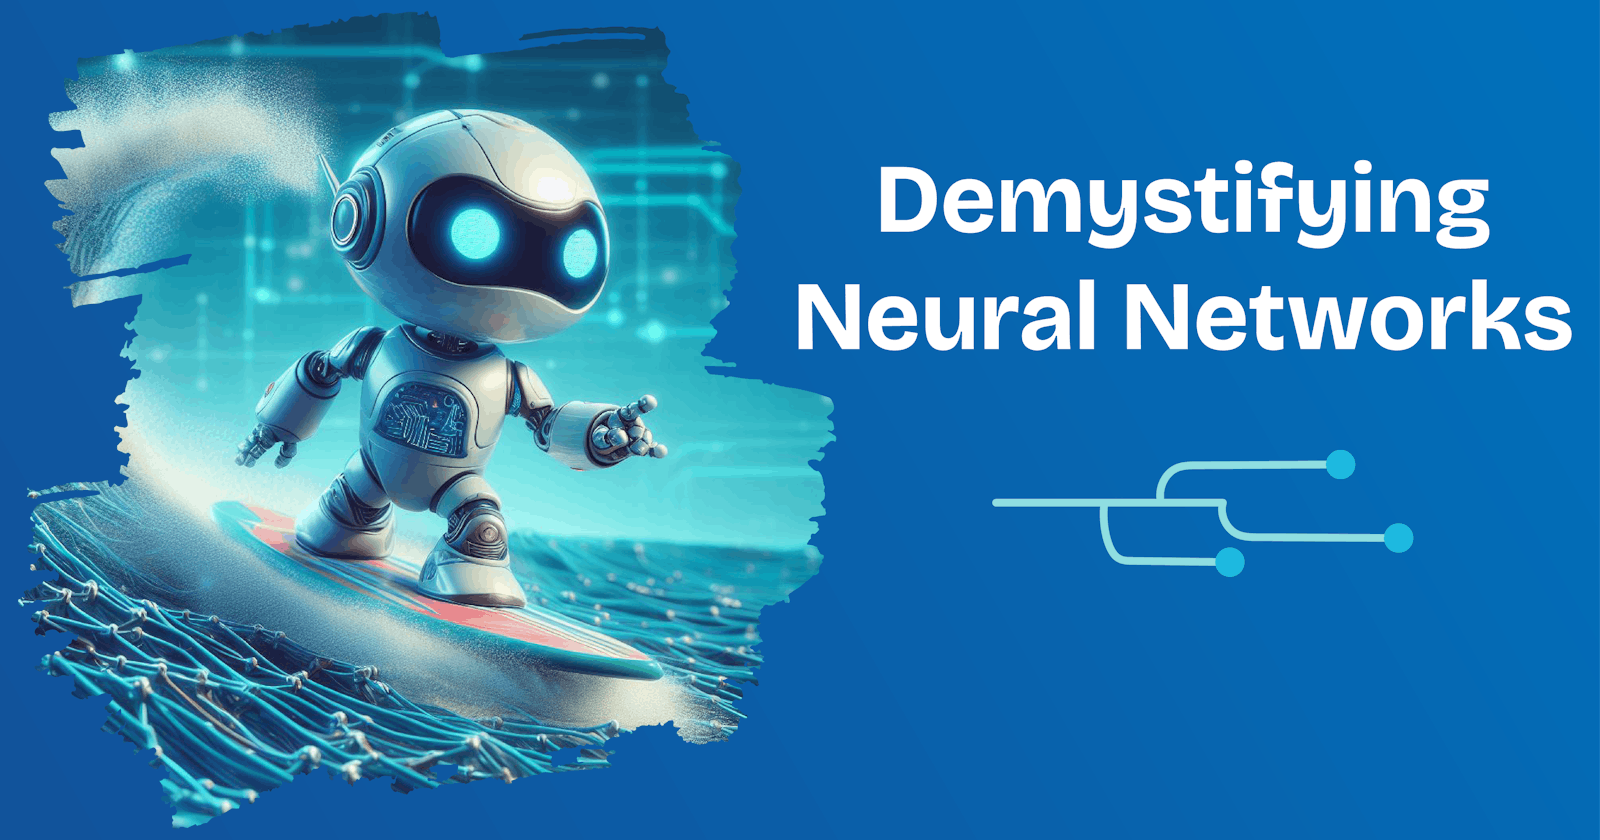 Demystifying Neural Networks